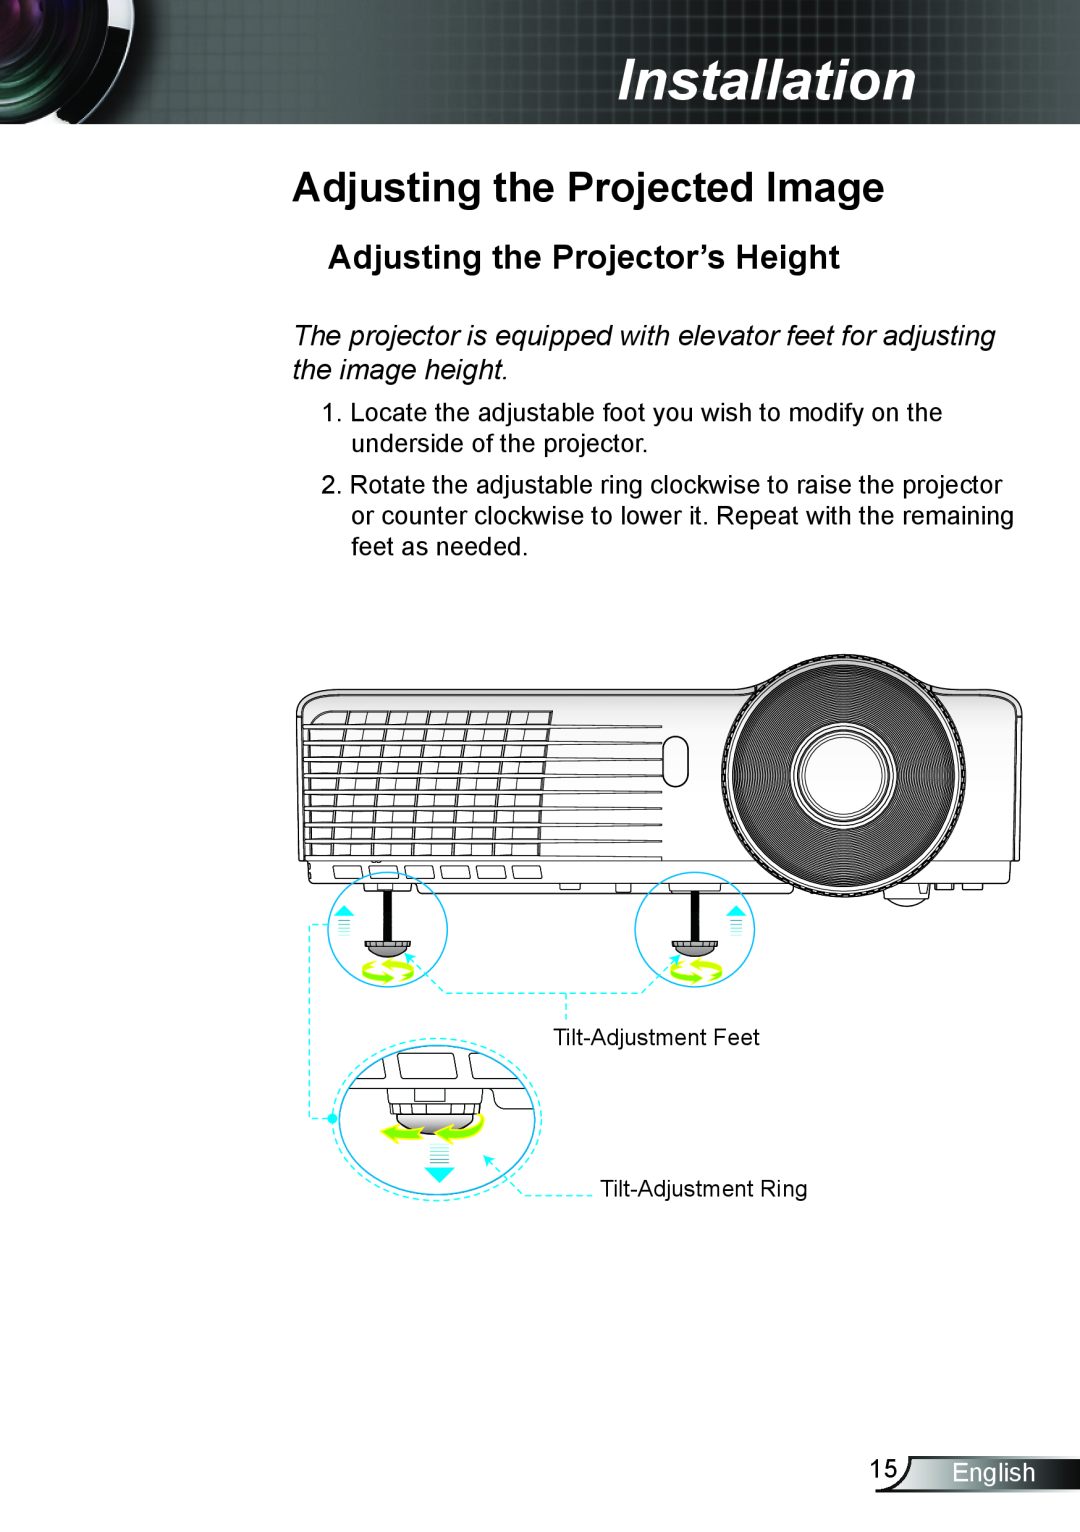 Optoma Technology DS339, TW5563D Adjusting the Projected Image, Adjusting the Projector’s Height, English, Installation 